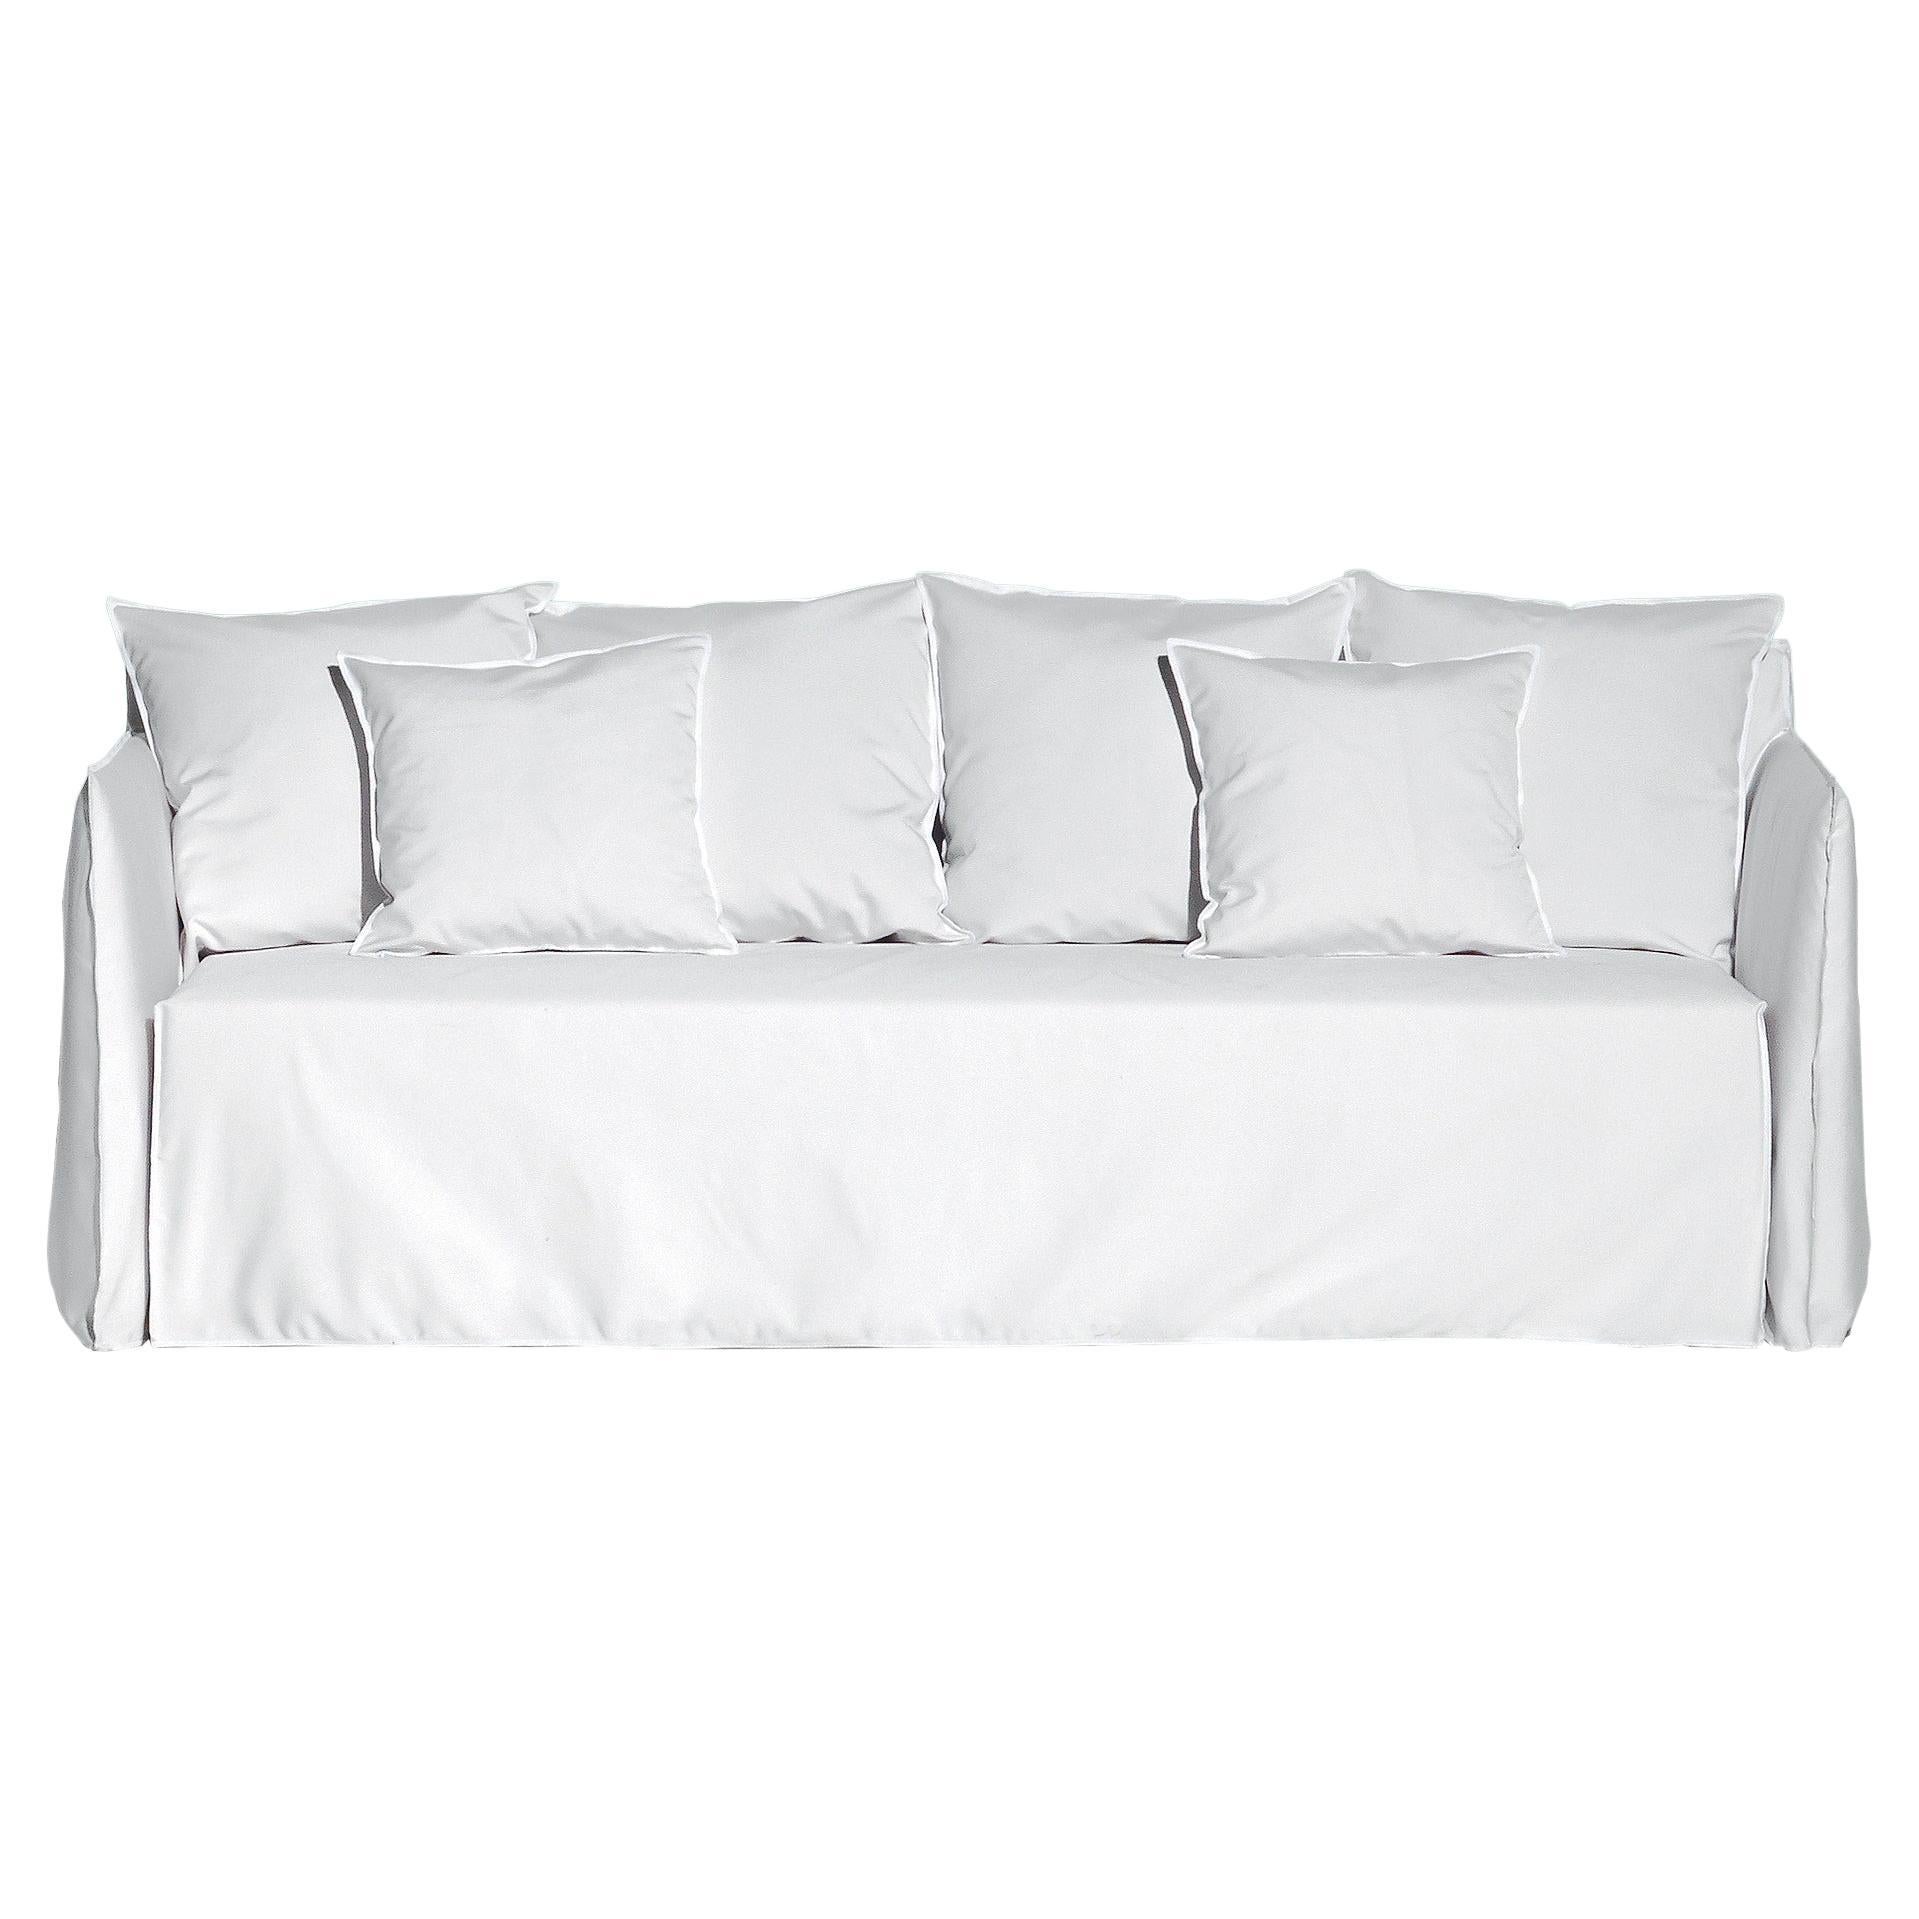 Gervasoni Ghost Out 12 Sofa in Aspen 03 Upholstery by Paola Navone For Sale